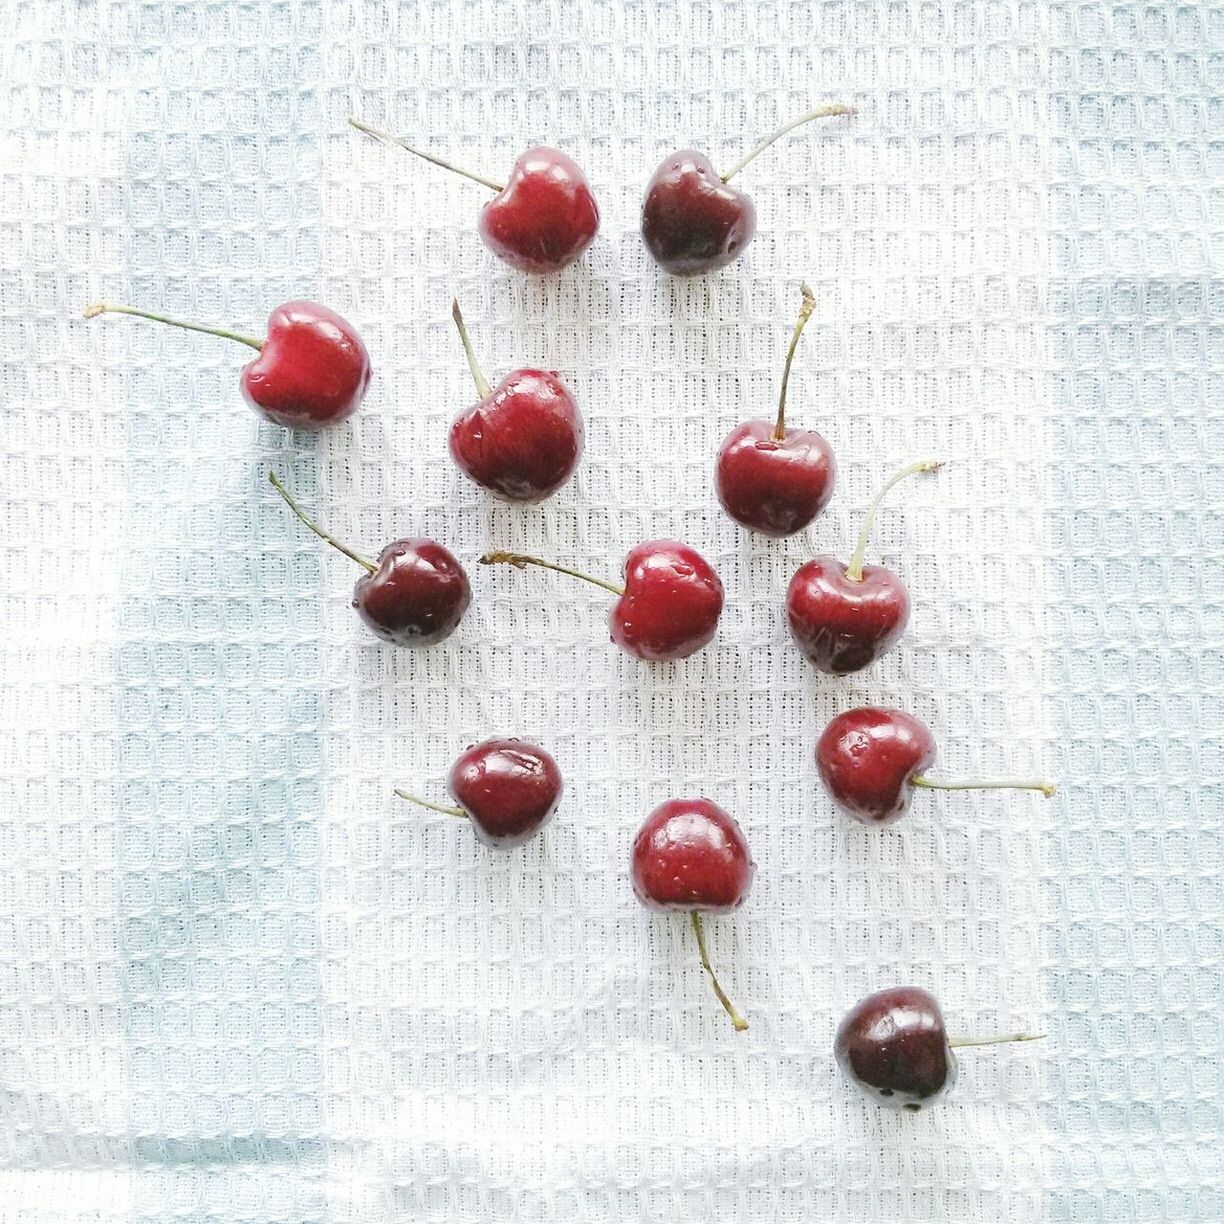 Overhead view of cherries on table